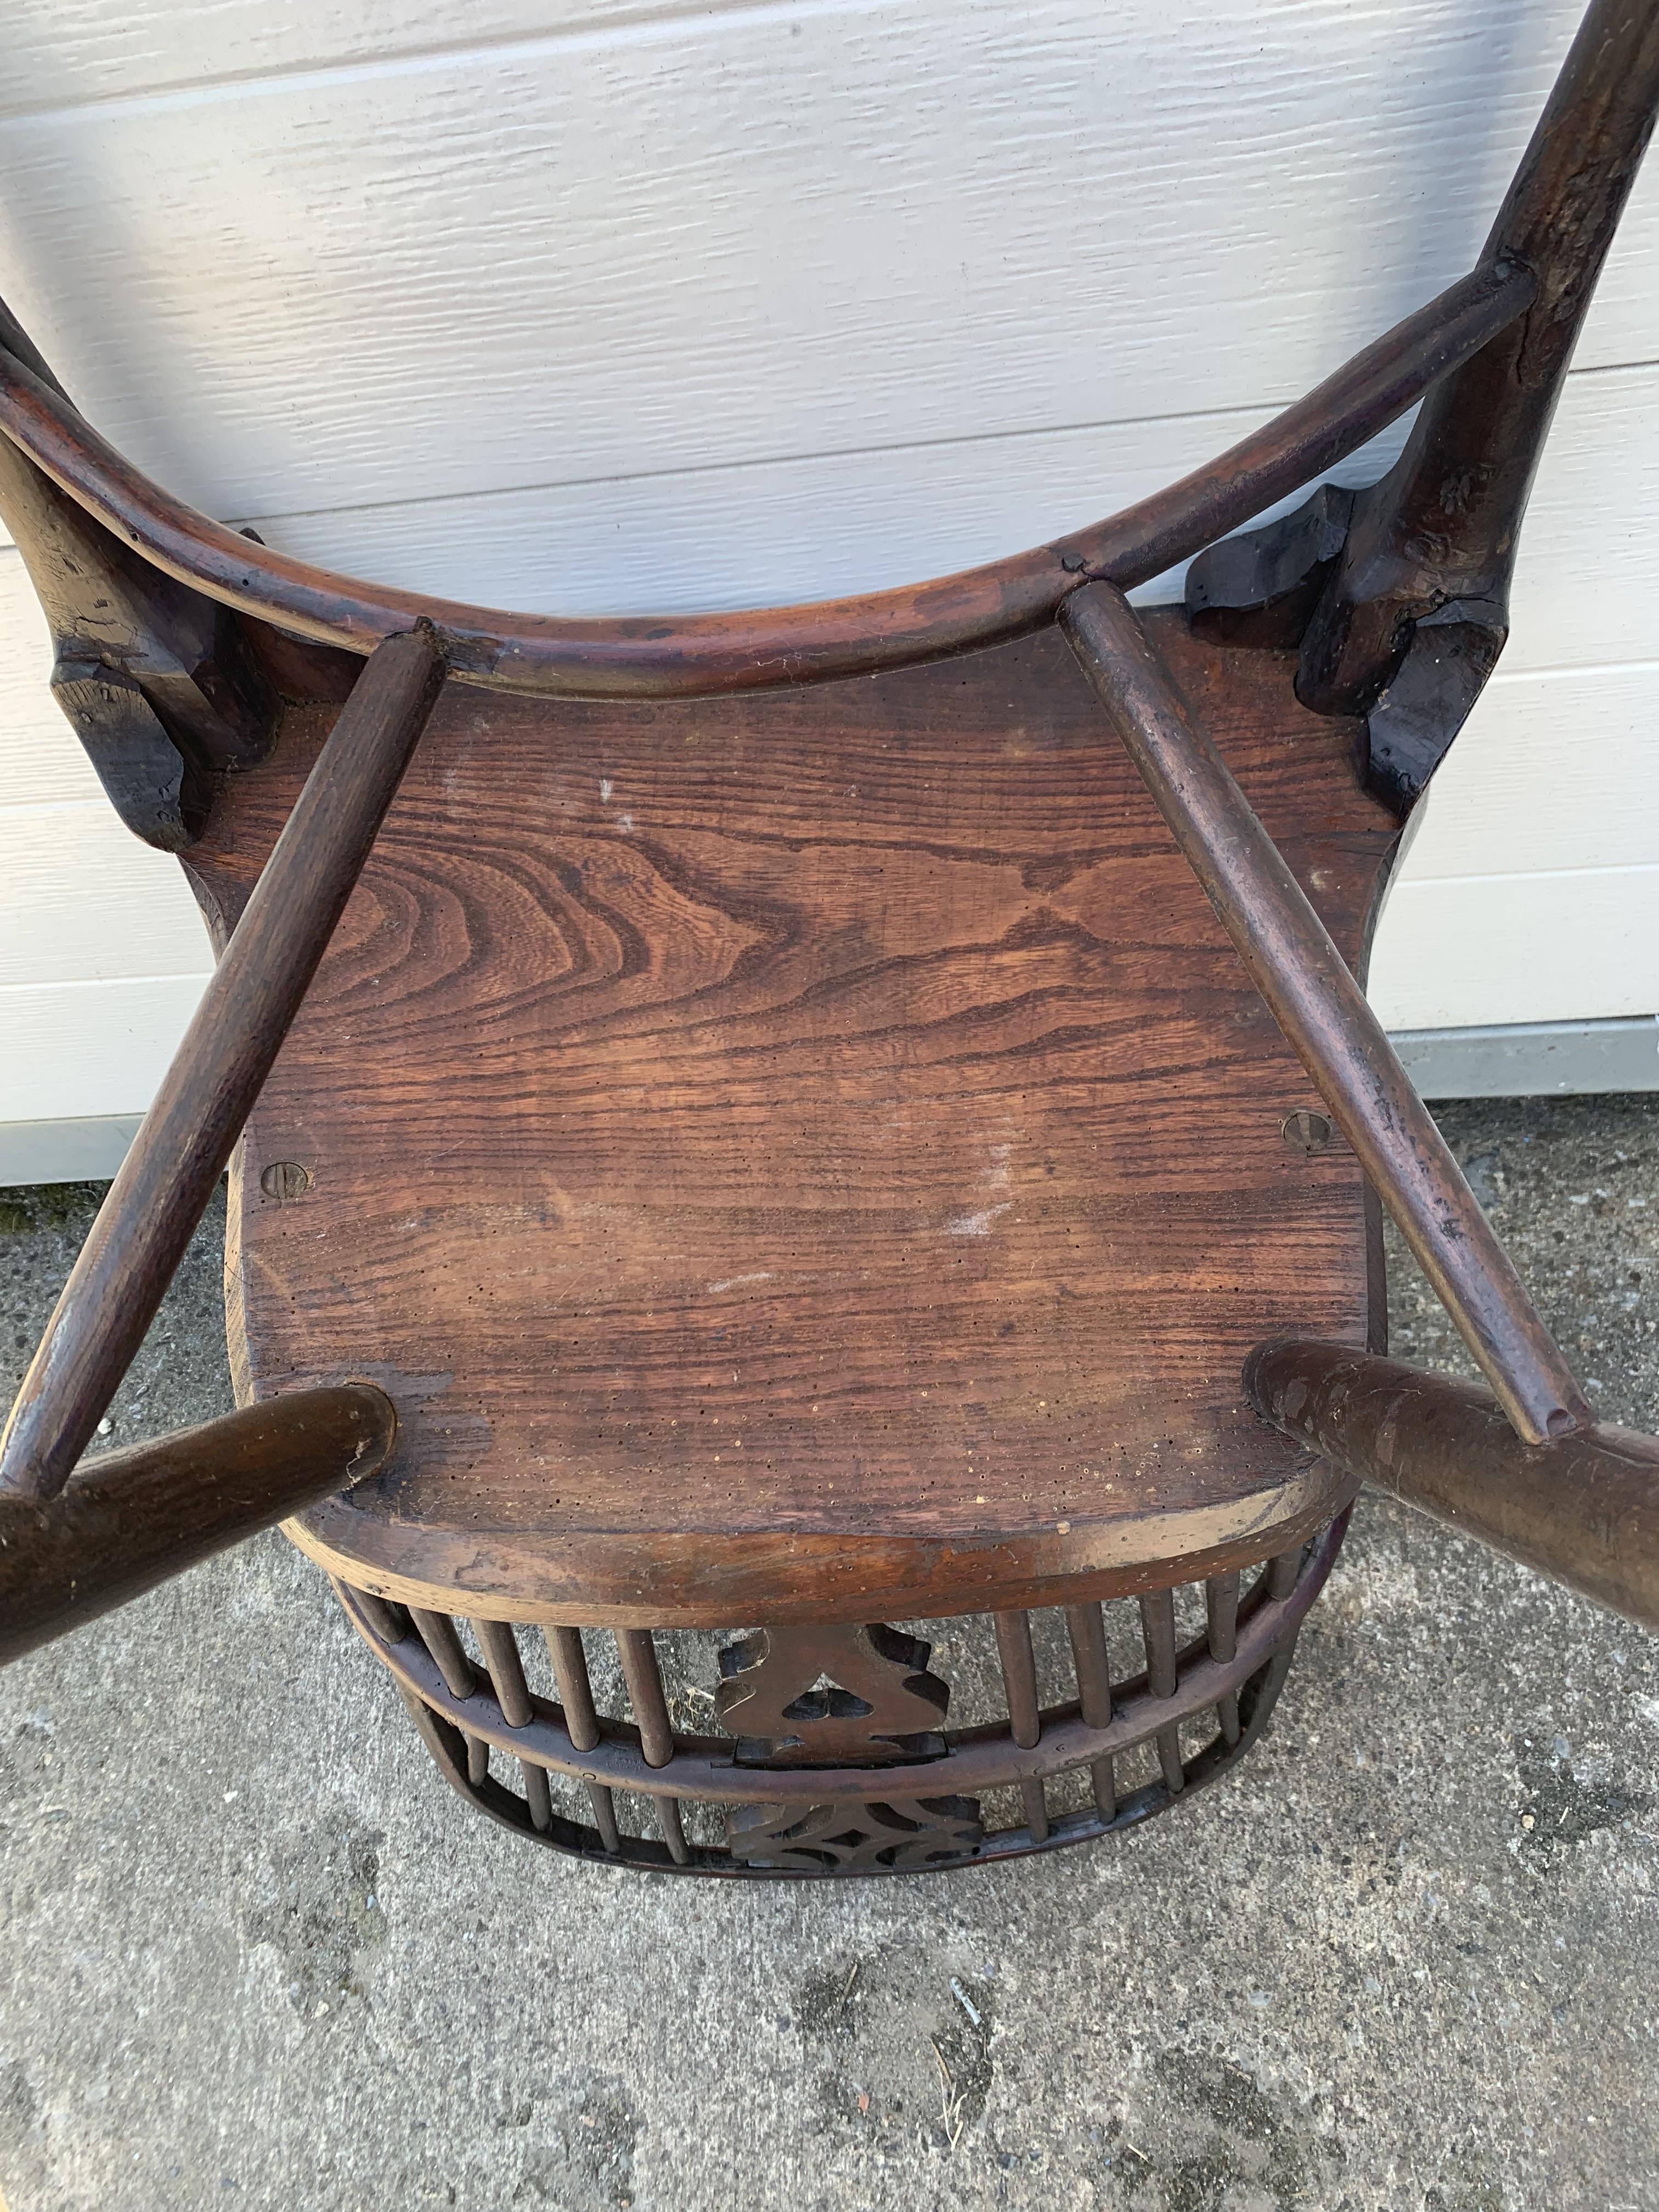 Windsor chair - Image 16 of 38